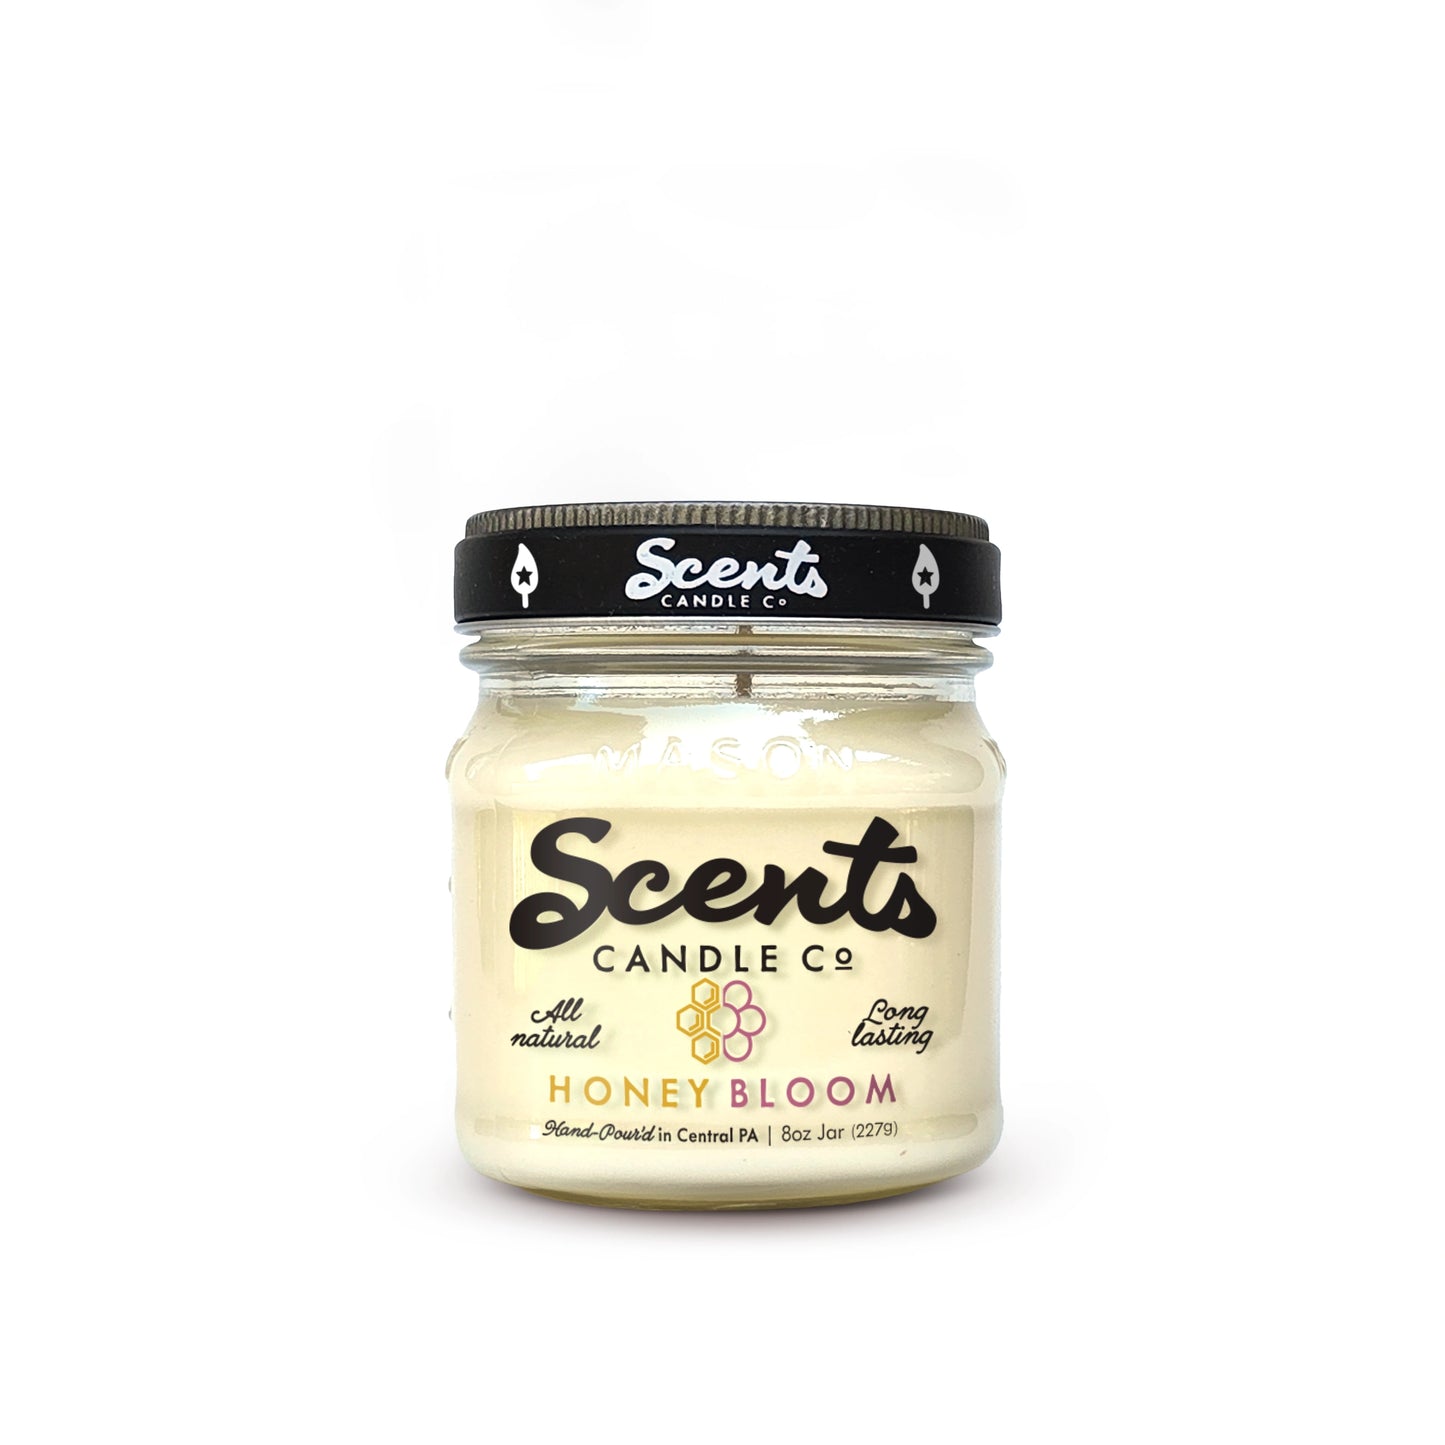 Scents Candle Co. Honey Bloom Soy Wax Candles